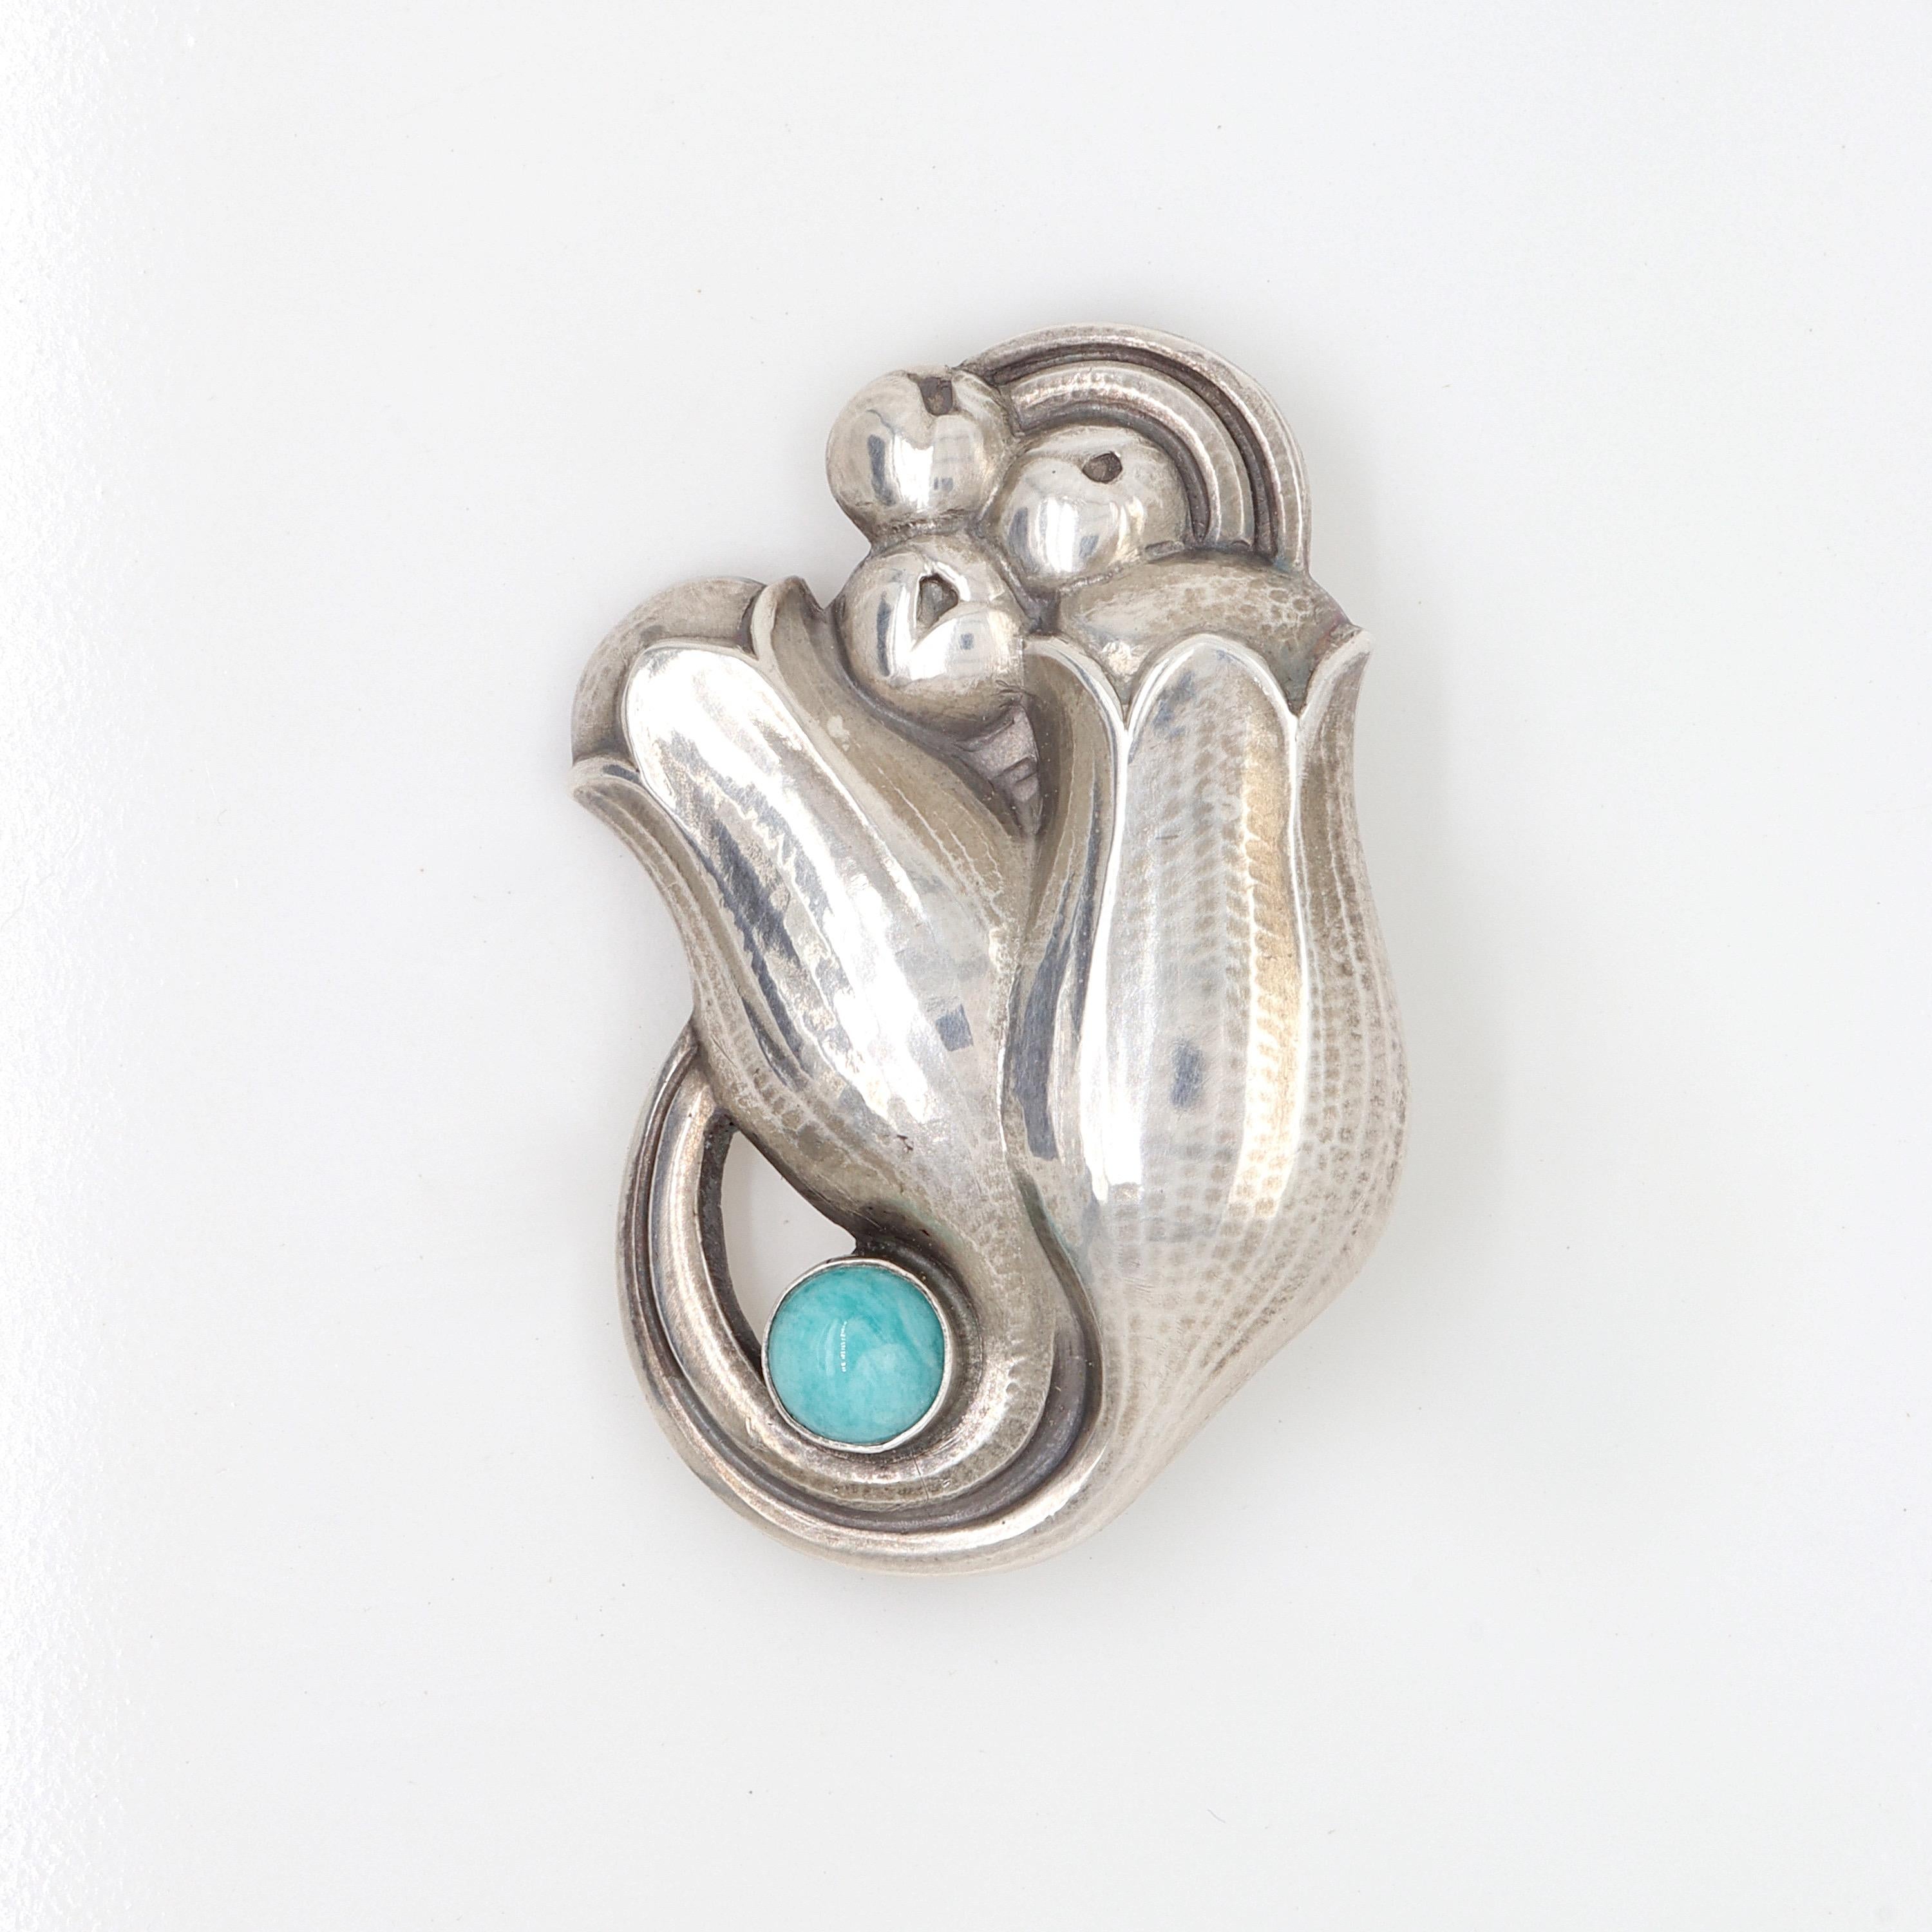 A fine Georg Jensen sterling silver pin or brooch.

Model no. 100B.

Designed by Georg Jensen.

In the form of hand-hammered, stylized tulip flowers and berries and with an amazonite cabochon.

Simply a wonderful brooch from Denmark's premier